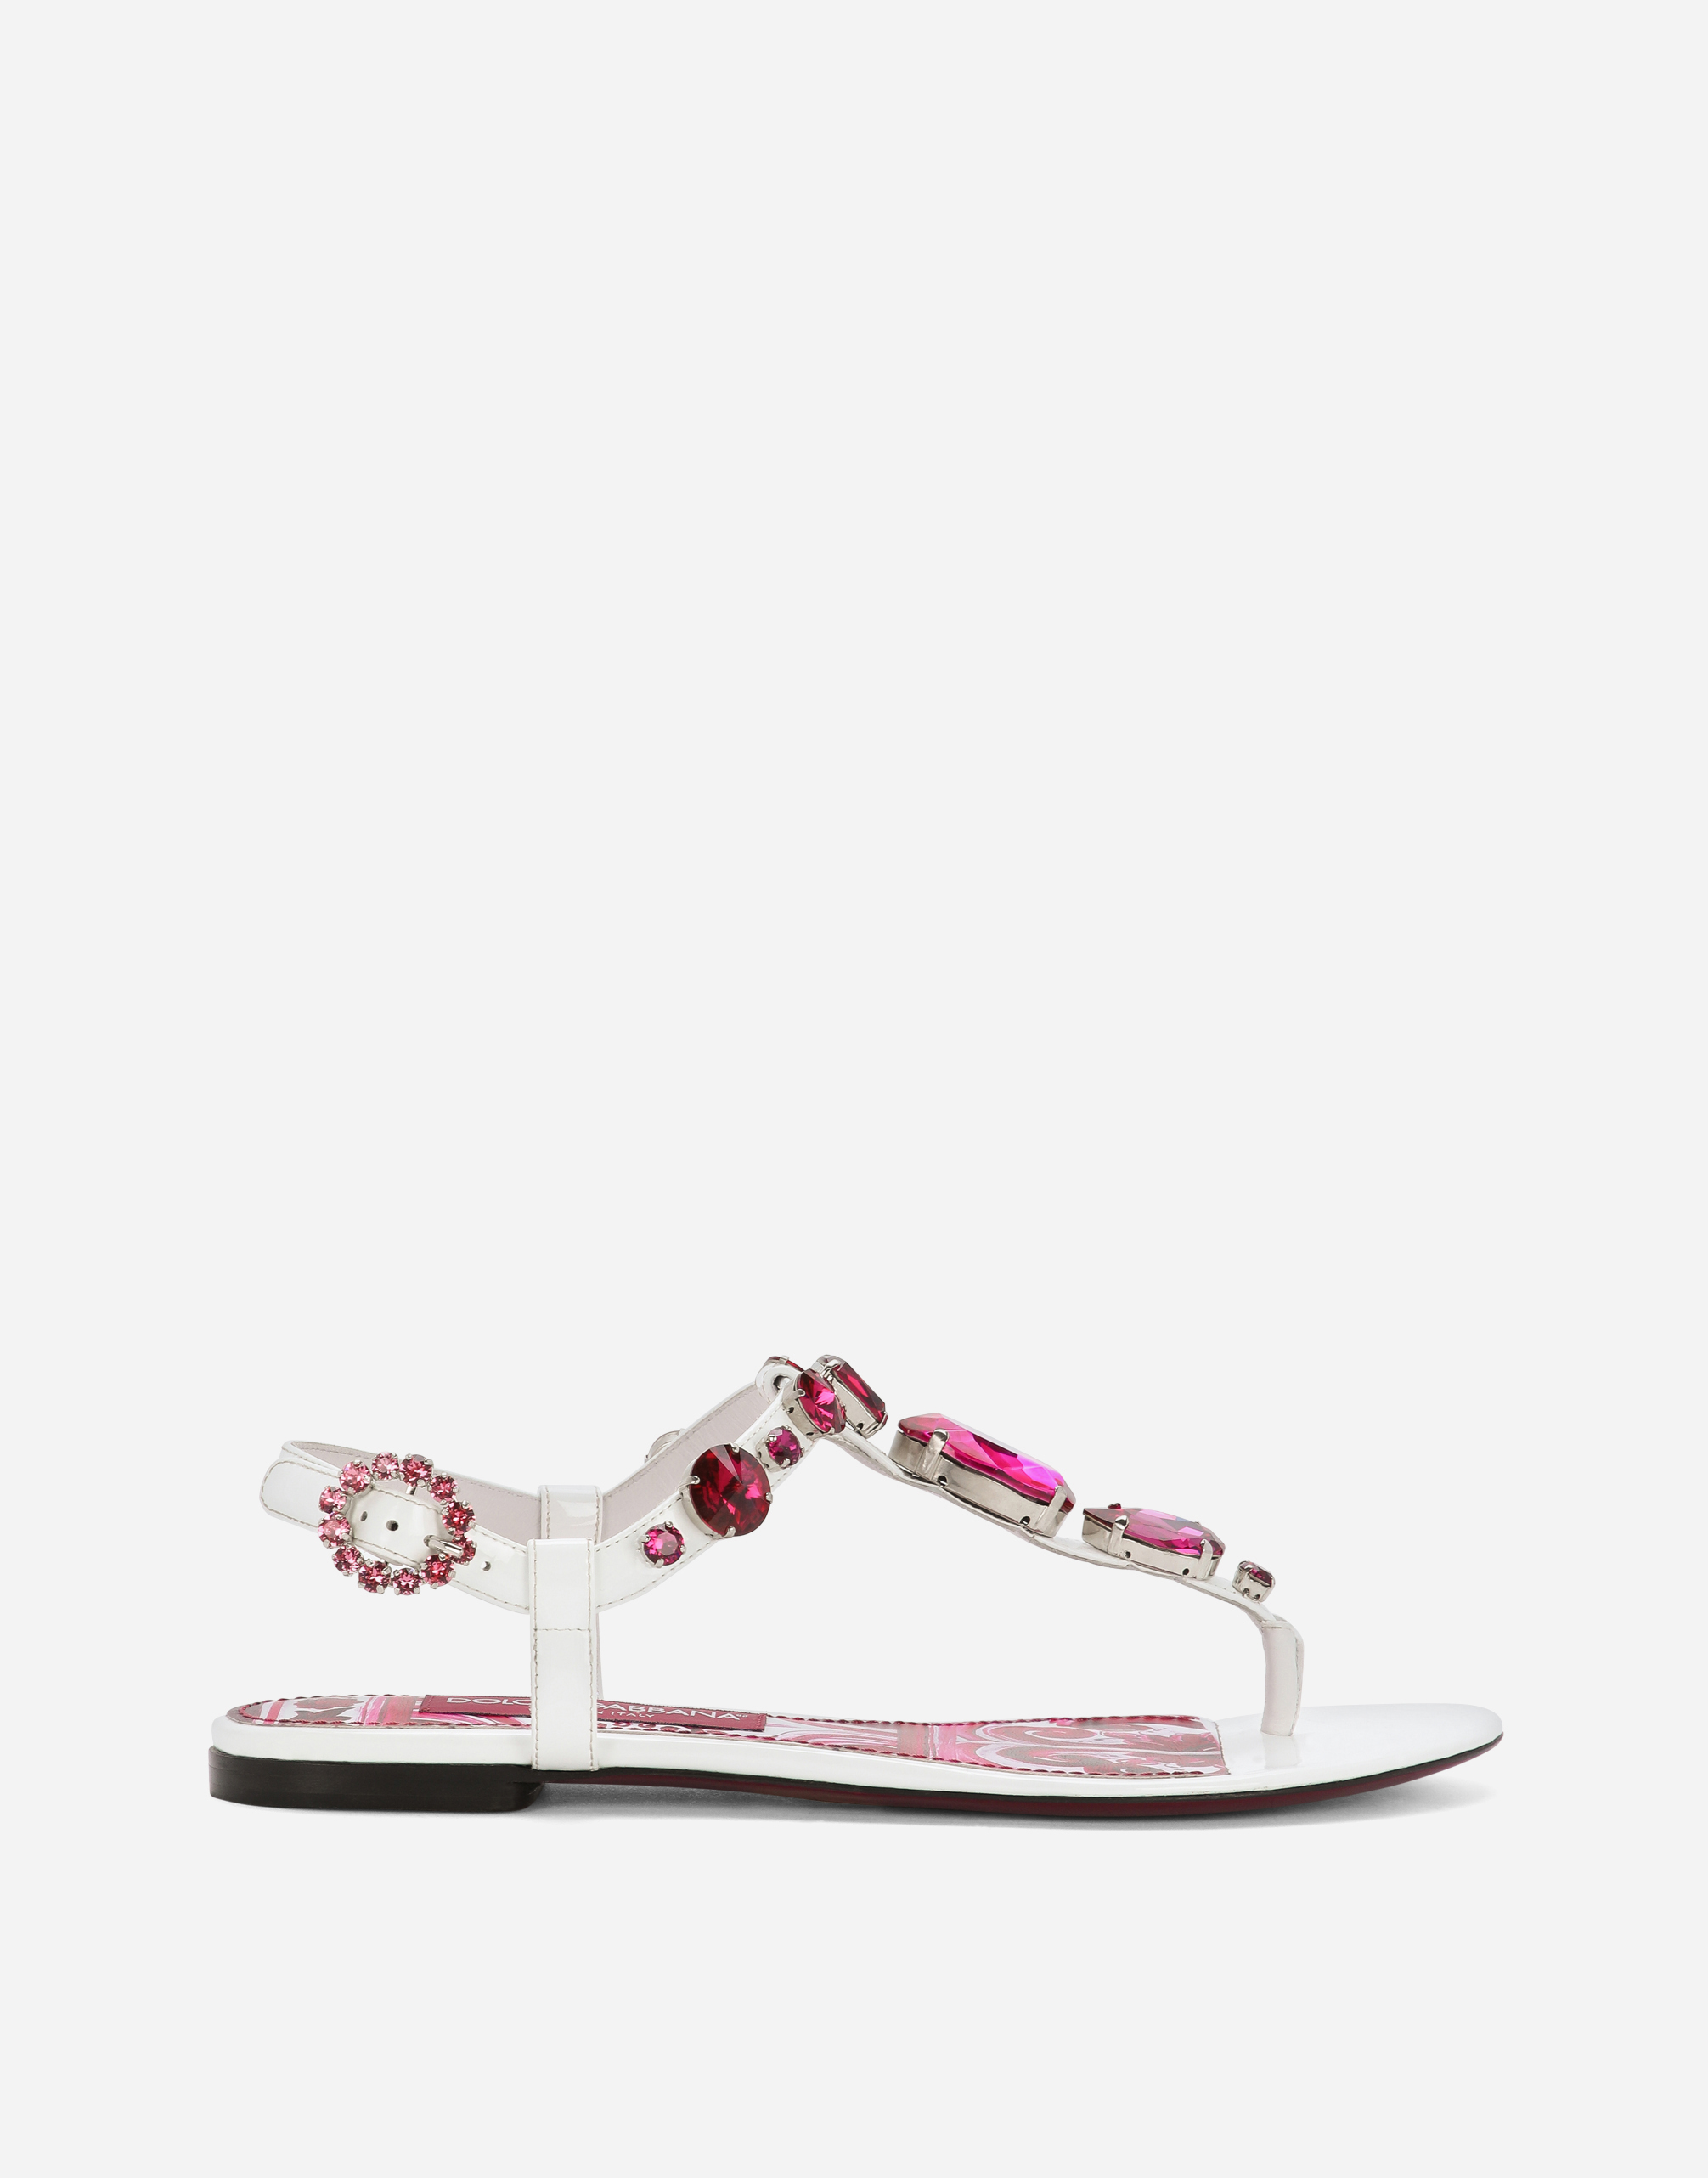 Dolce & Gabbana Patent Leather Thong Sandals In Multicolor